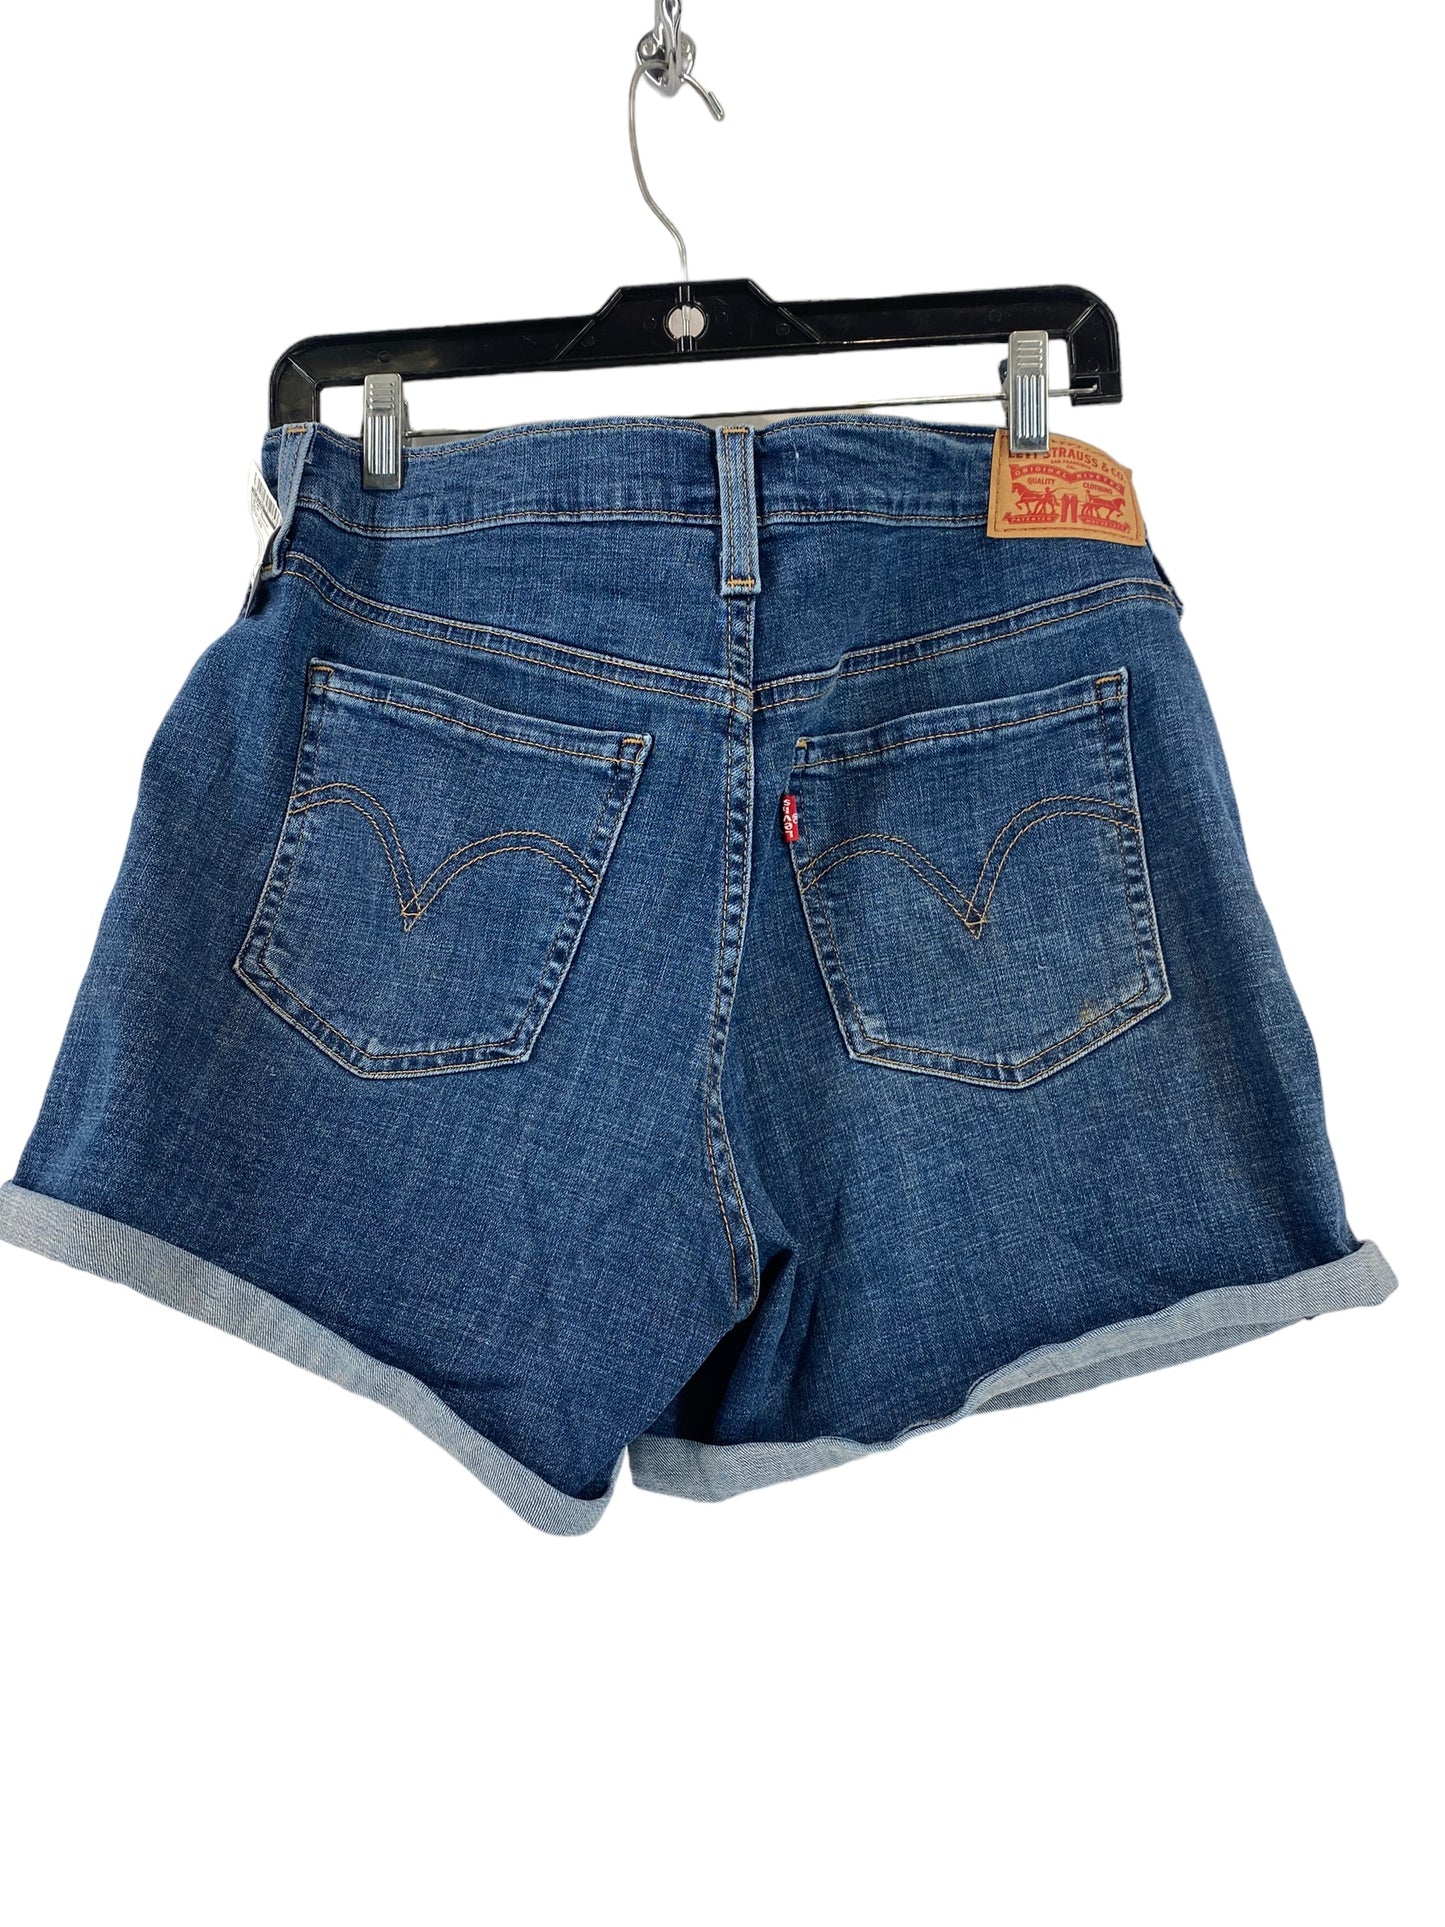 Shorts By Levis  Size: 31